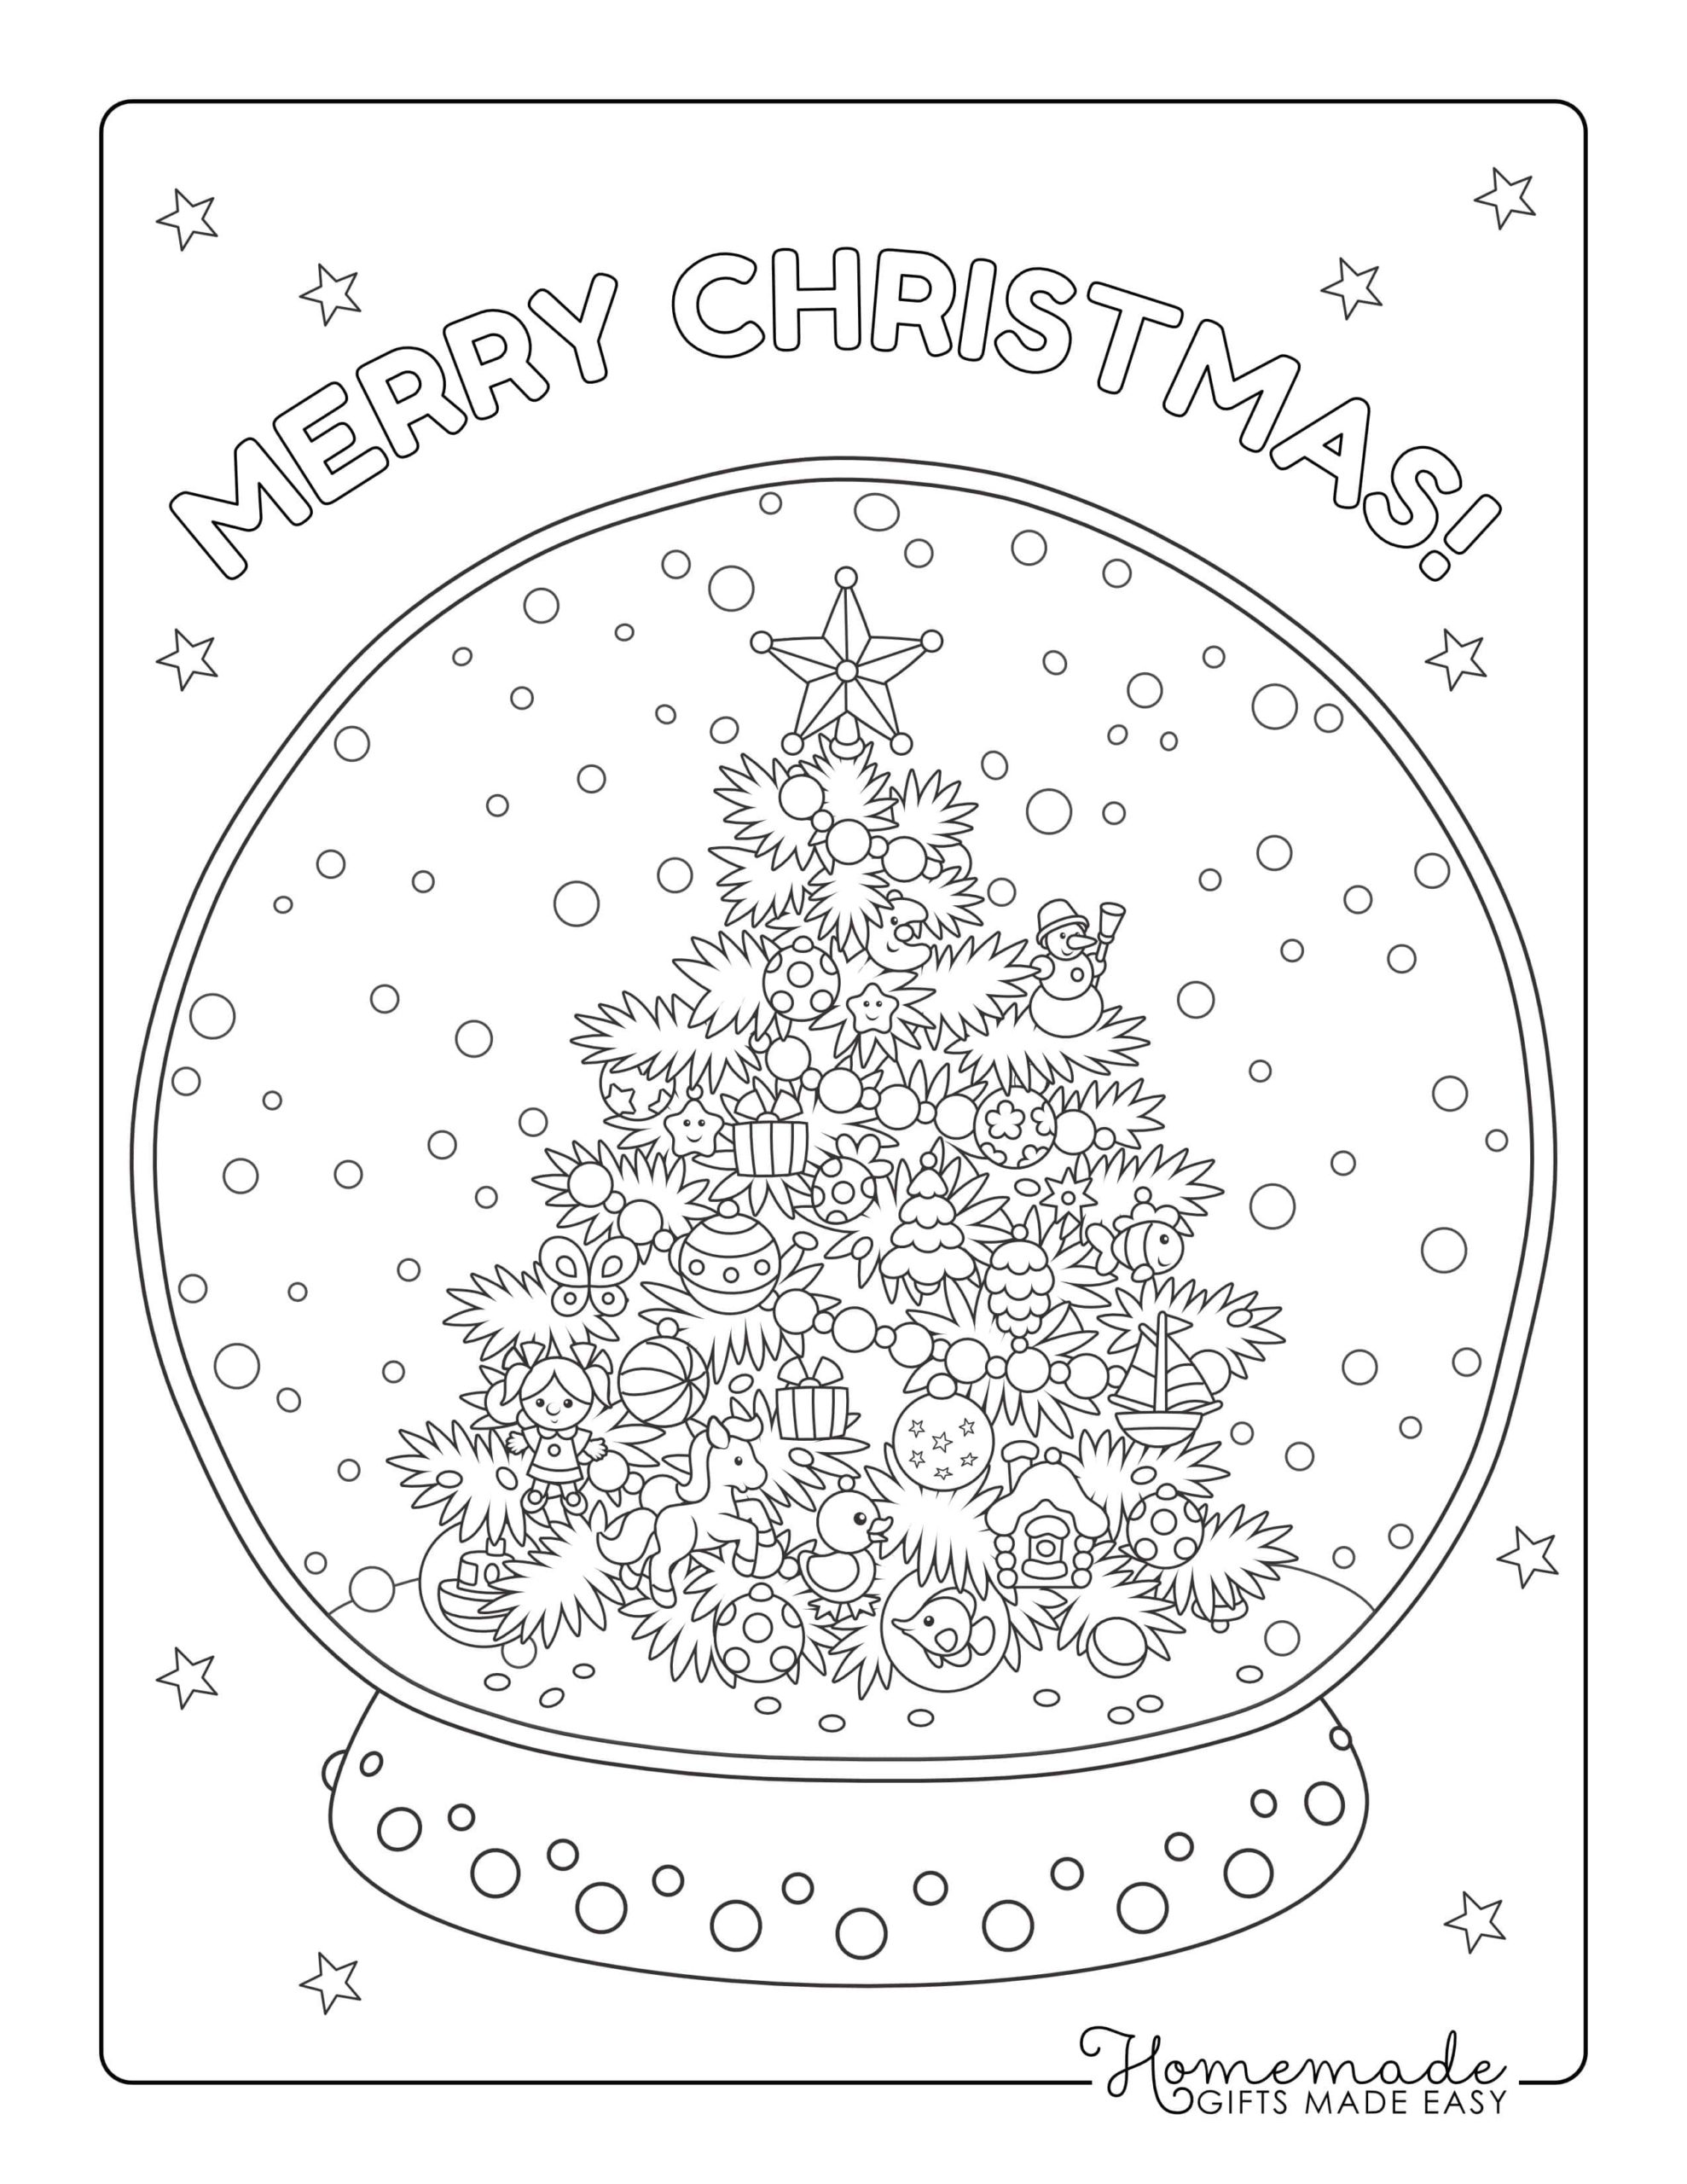 168,109 Adult Coloring Winter Images, Stock Photos, 3D objects